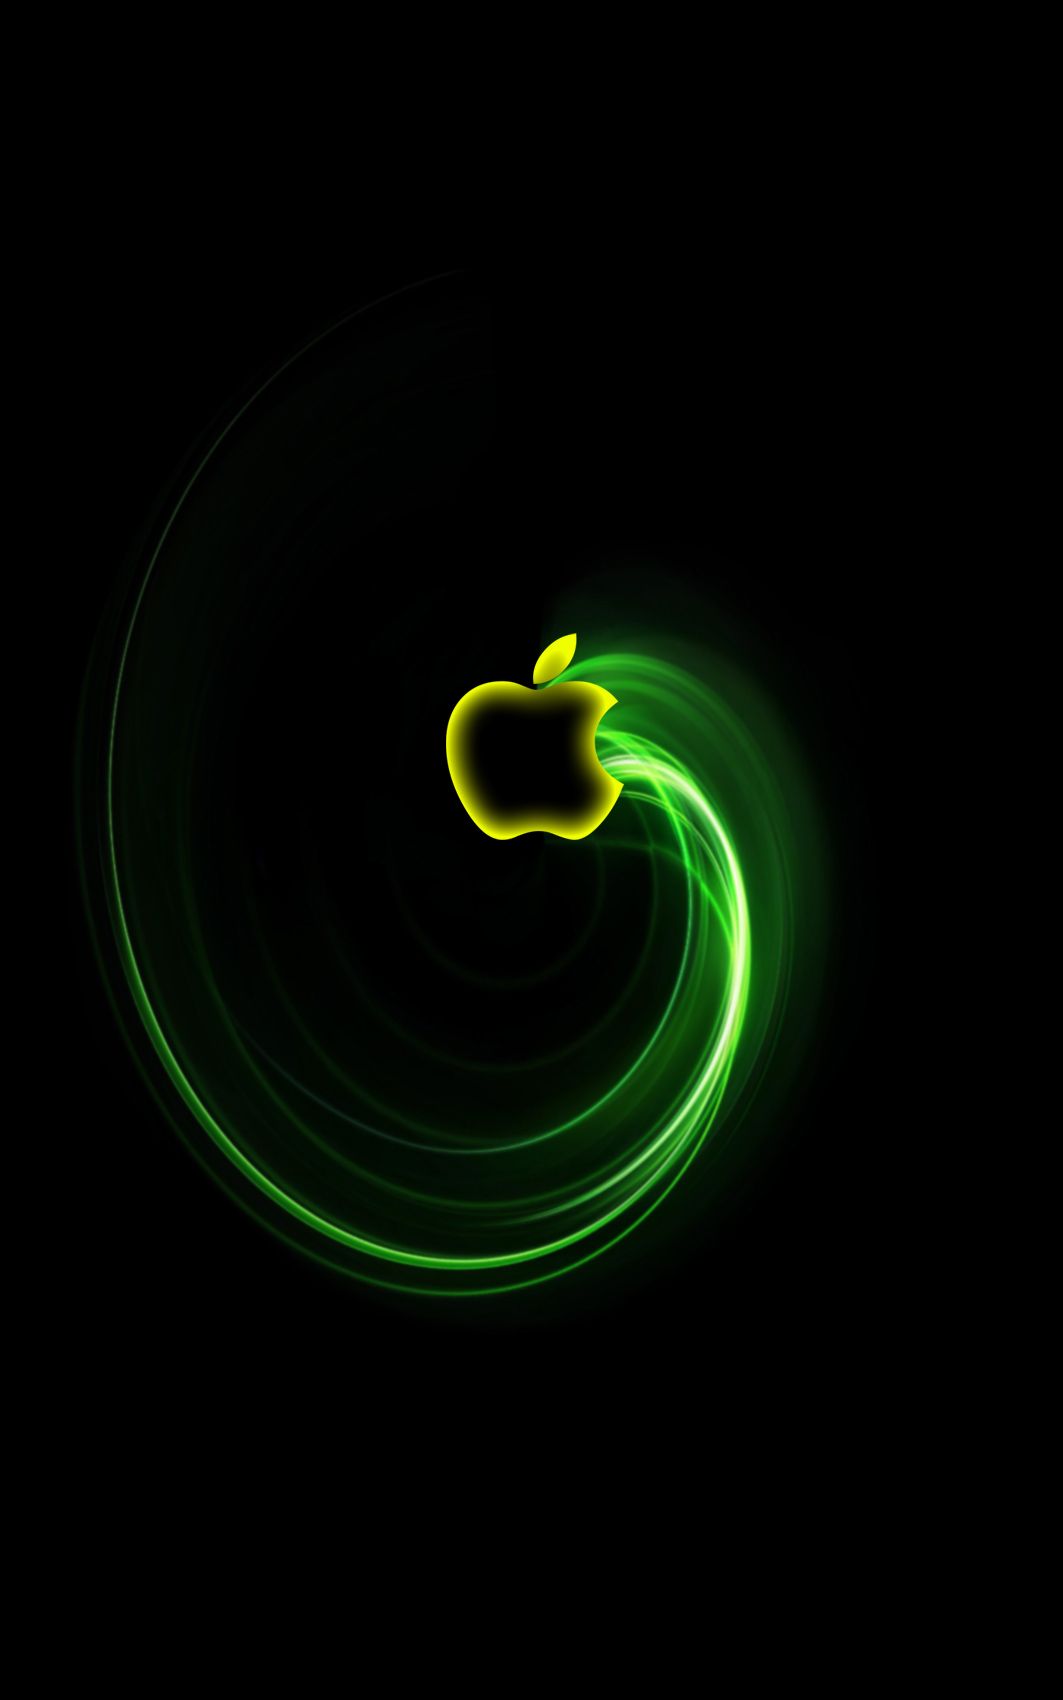 Apple to become carbon neutral in 8 years